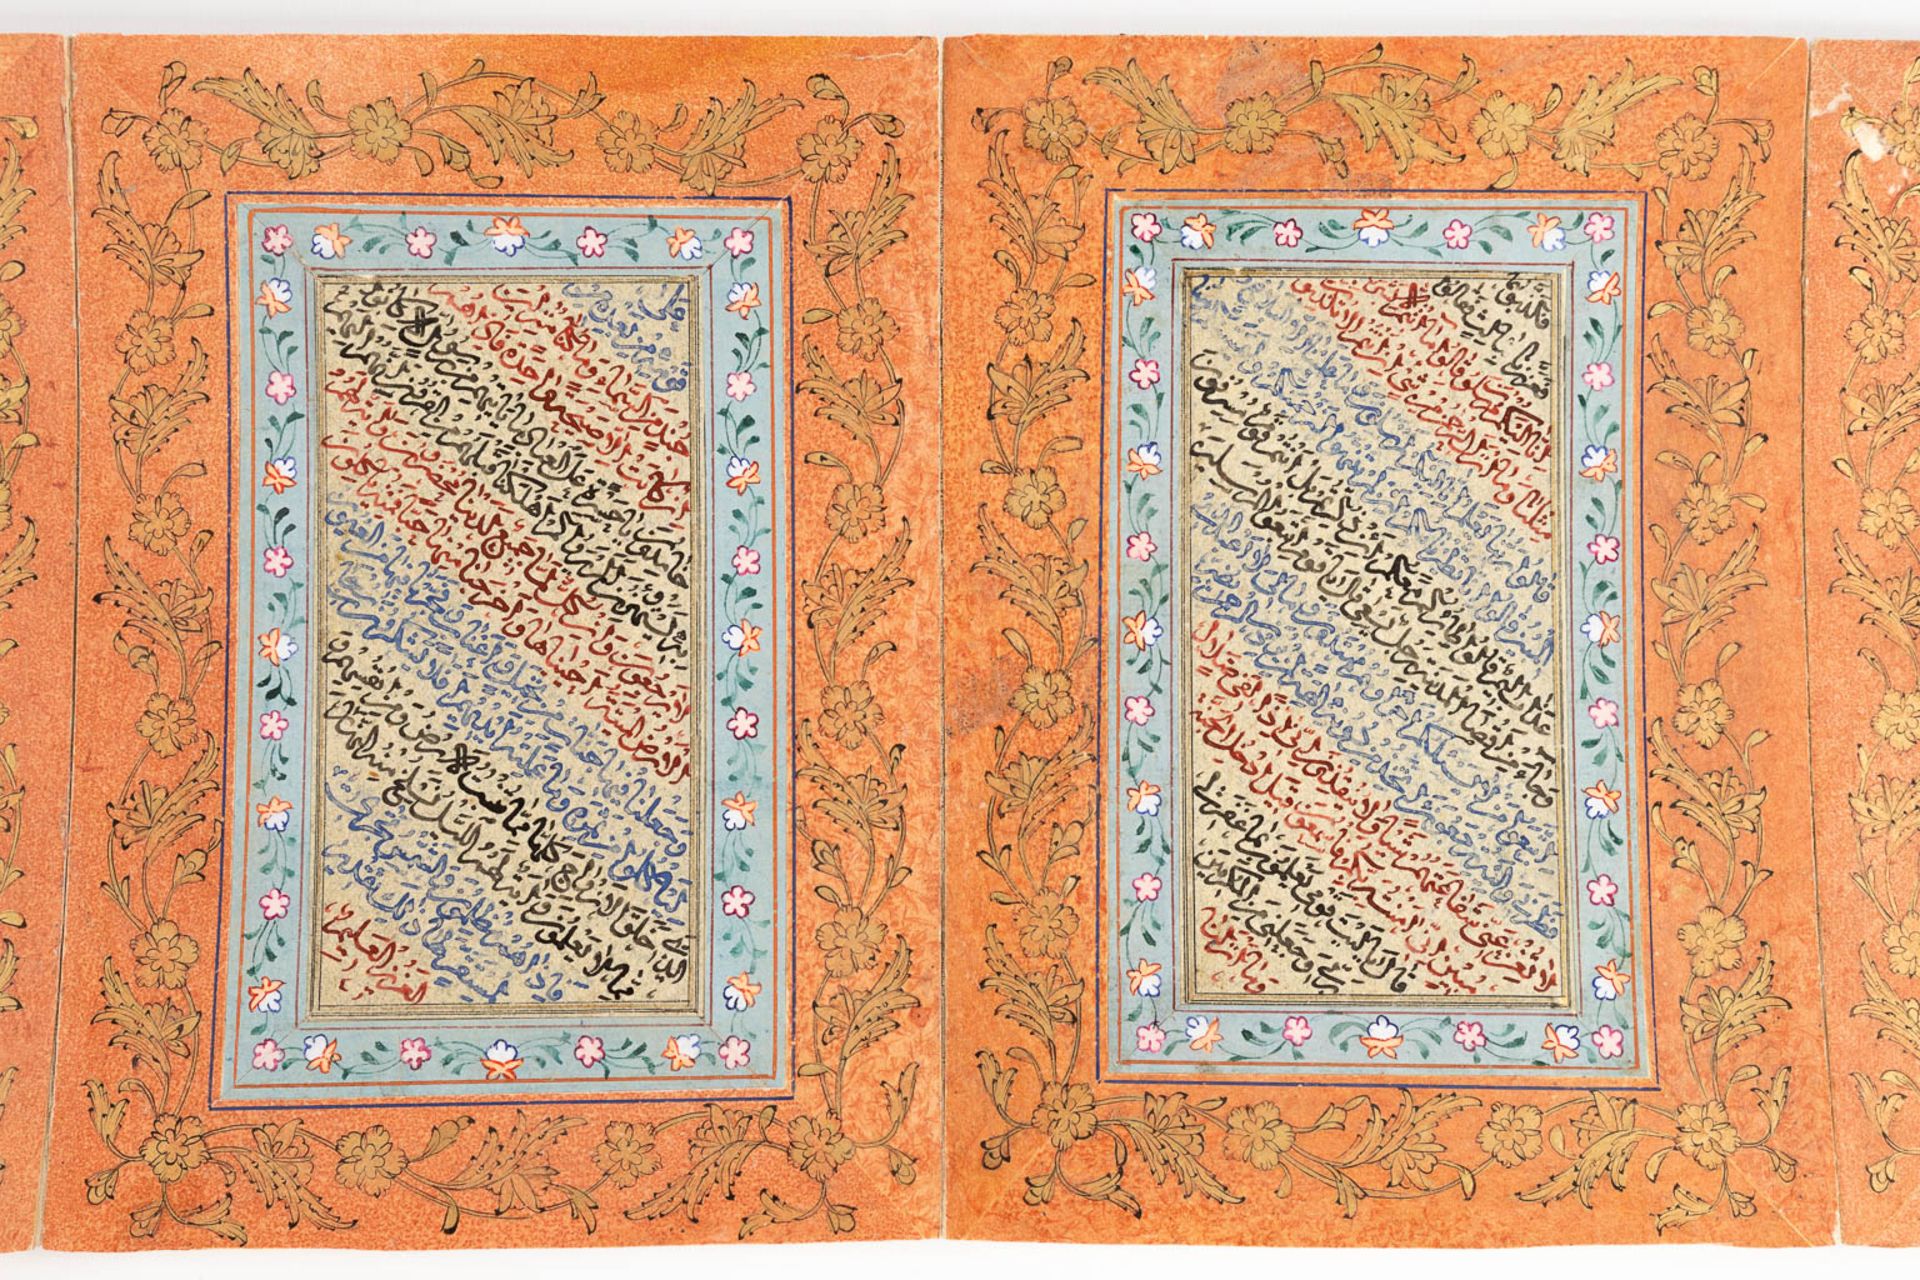 An album of Ottoman Calligraphic Panels (QITA) early 20th C. (W:15 x H:20 cm) - Image 6 of 12